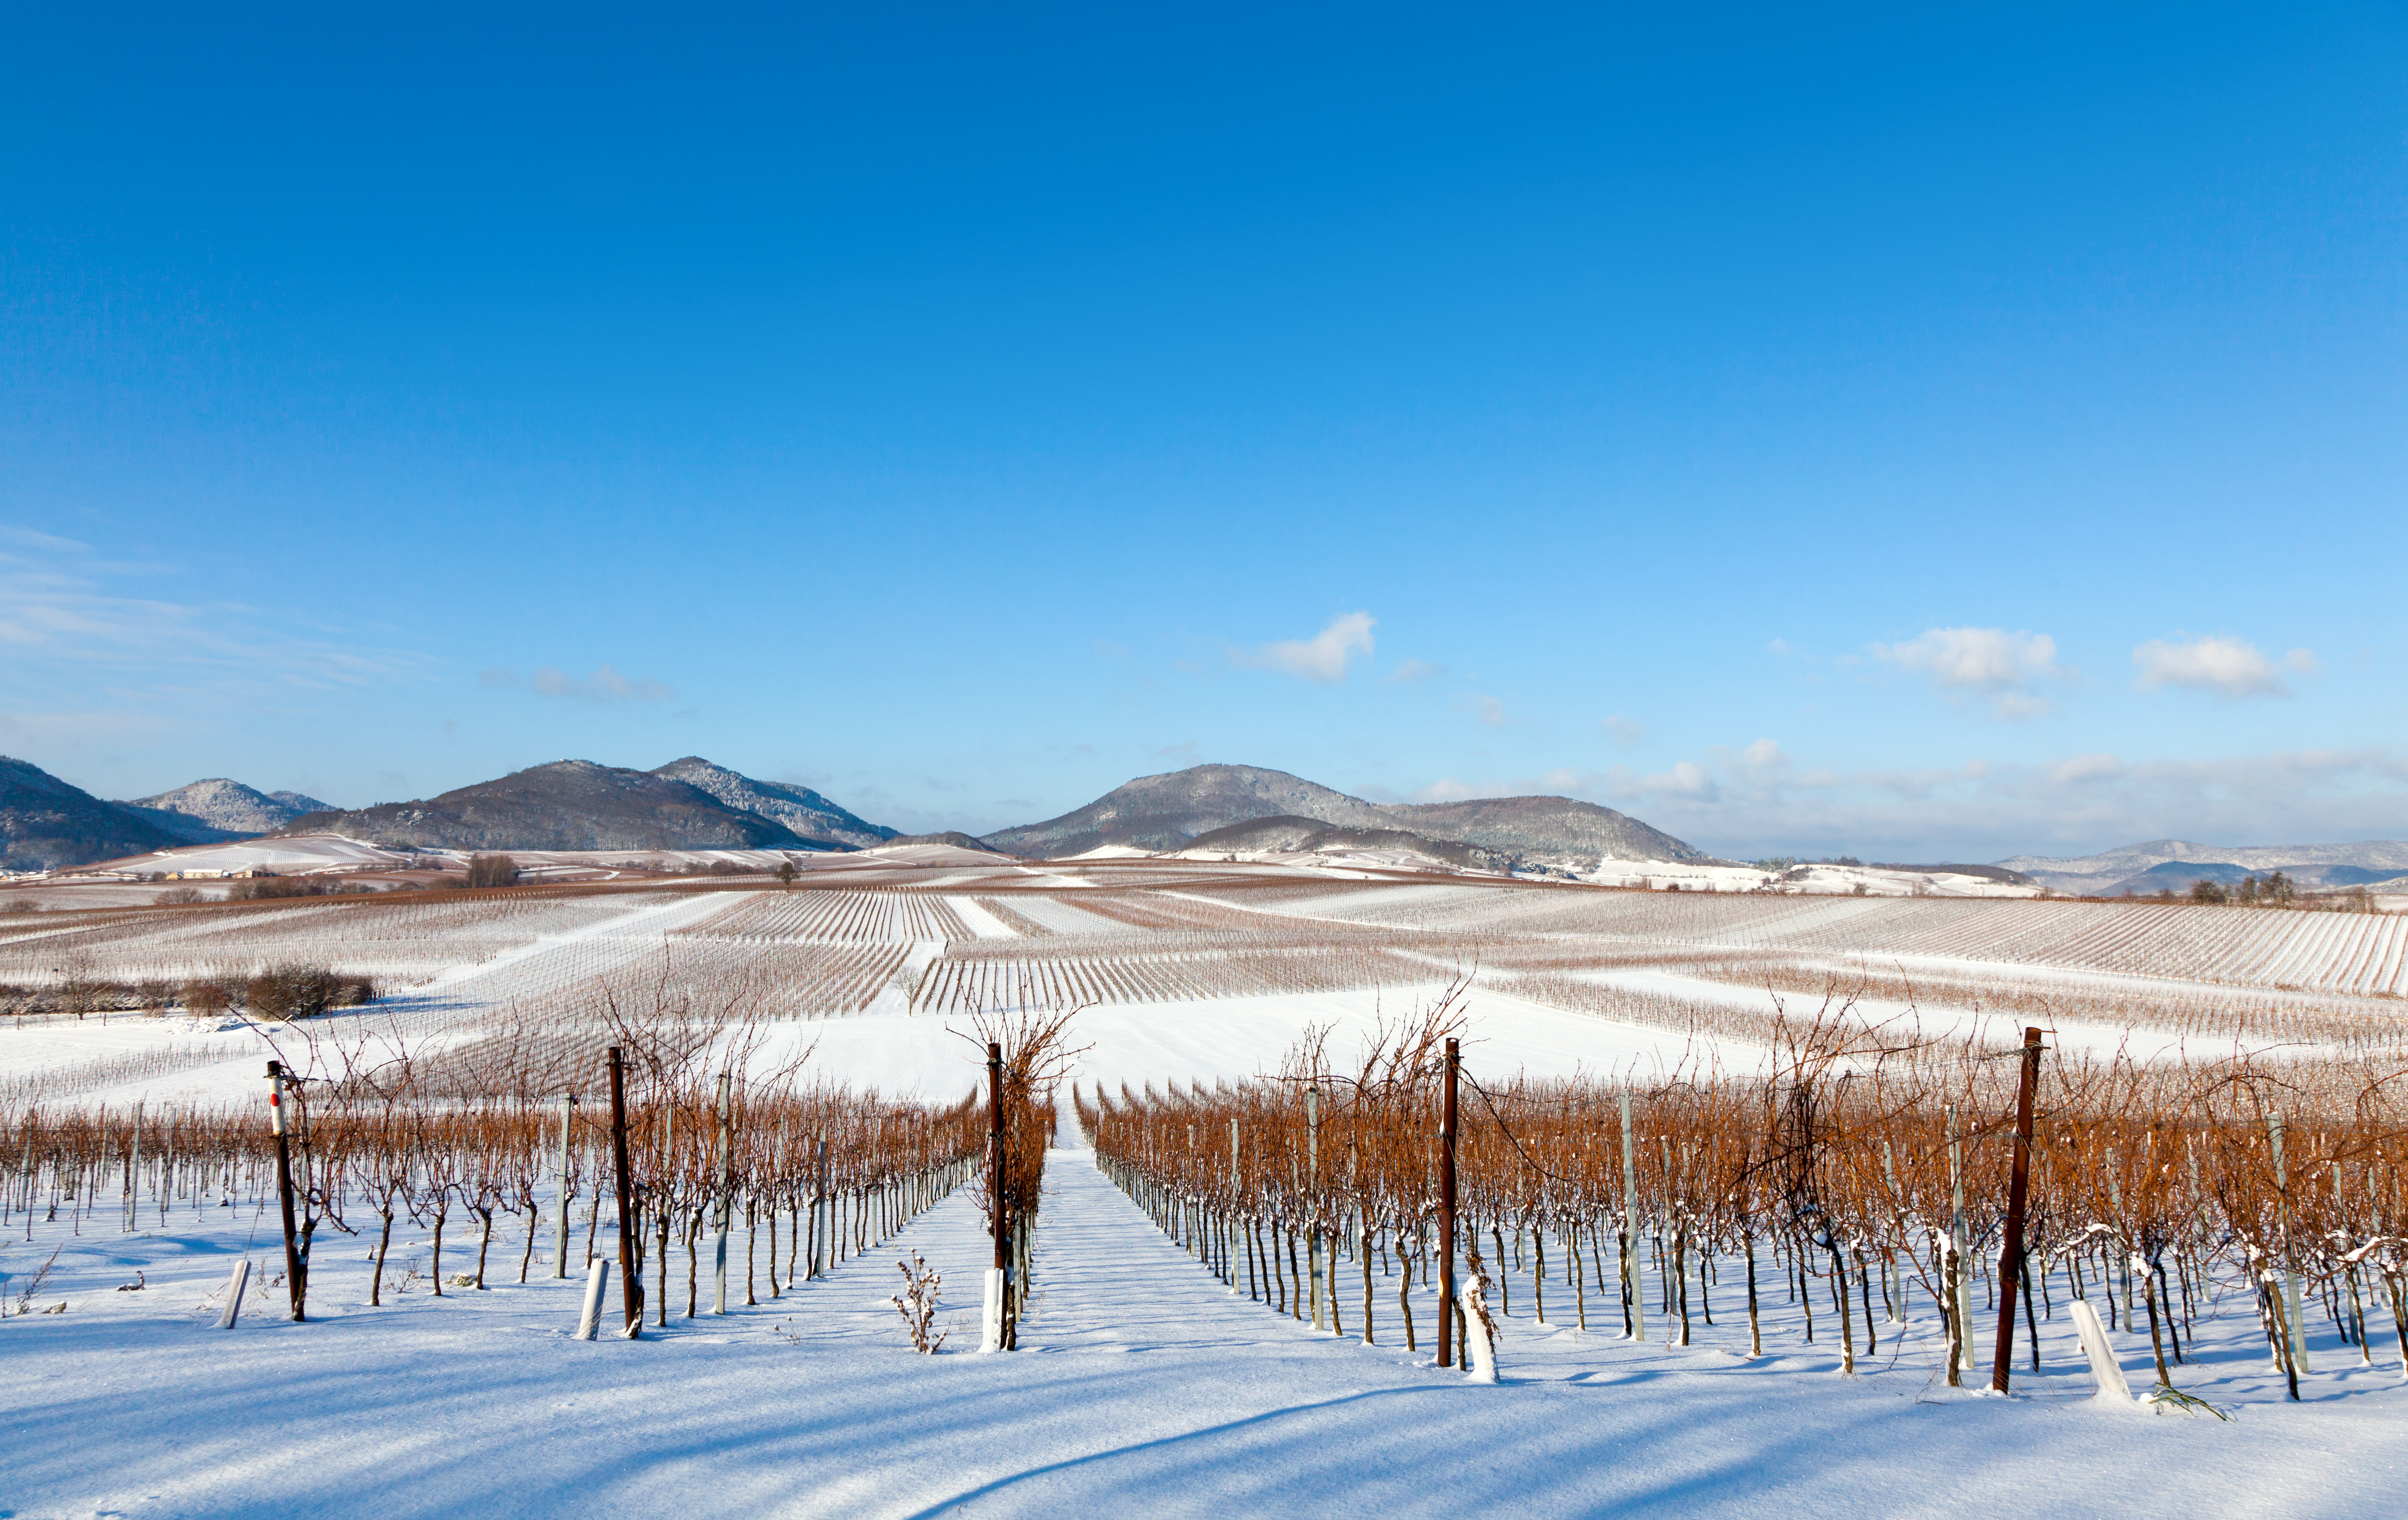 Winter vineyard in full dormancy with snow covering the ground and distant mountains